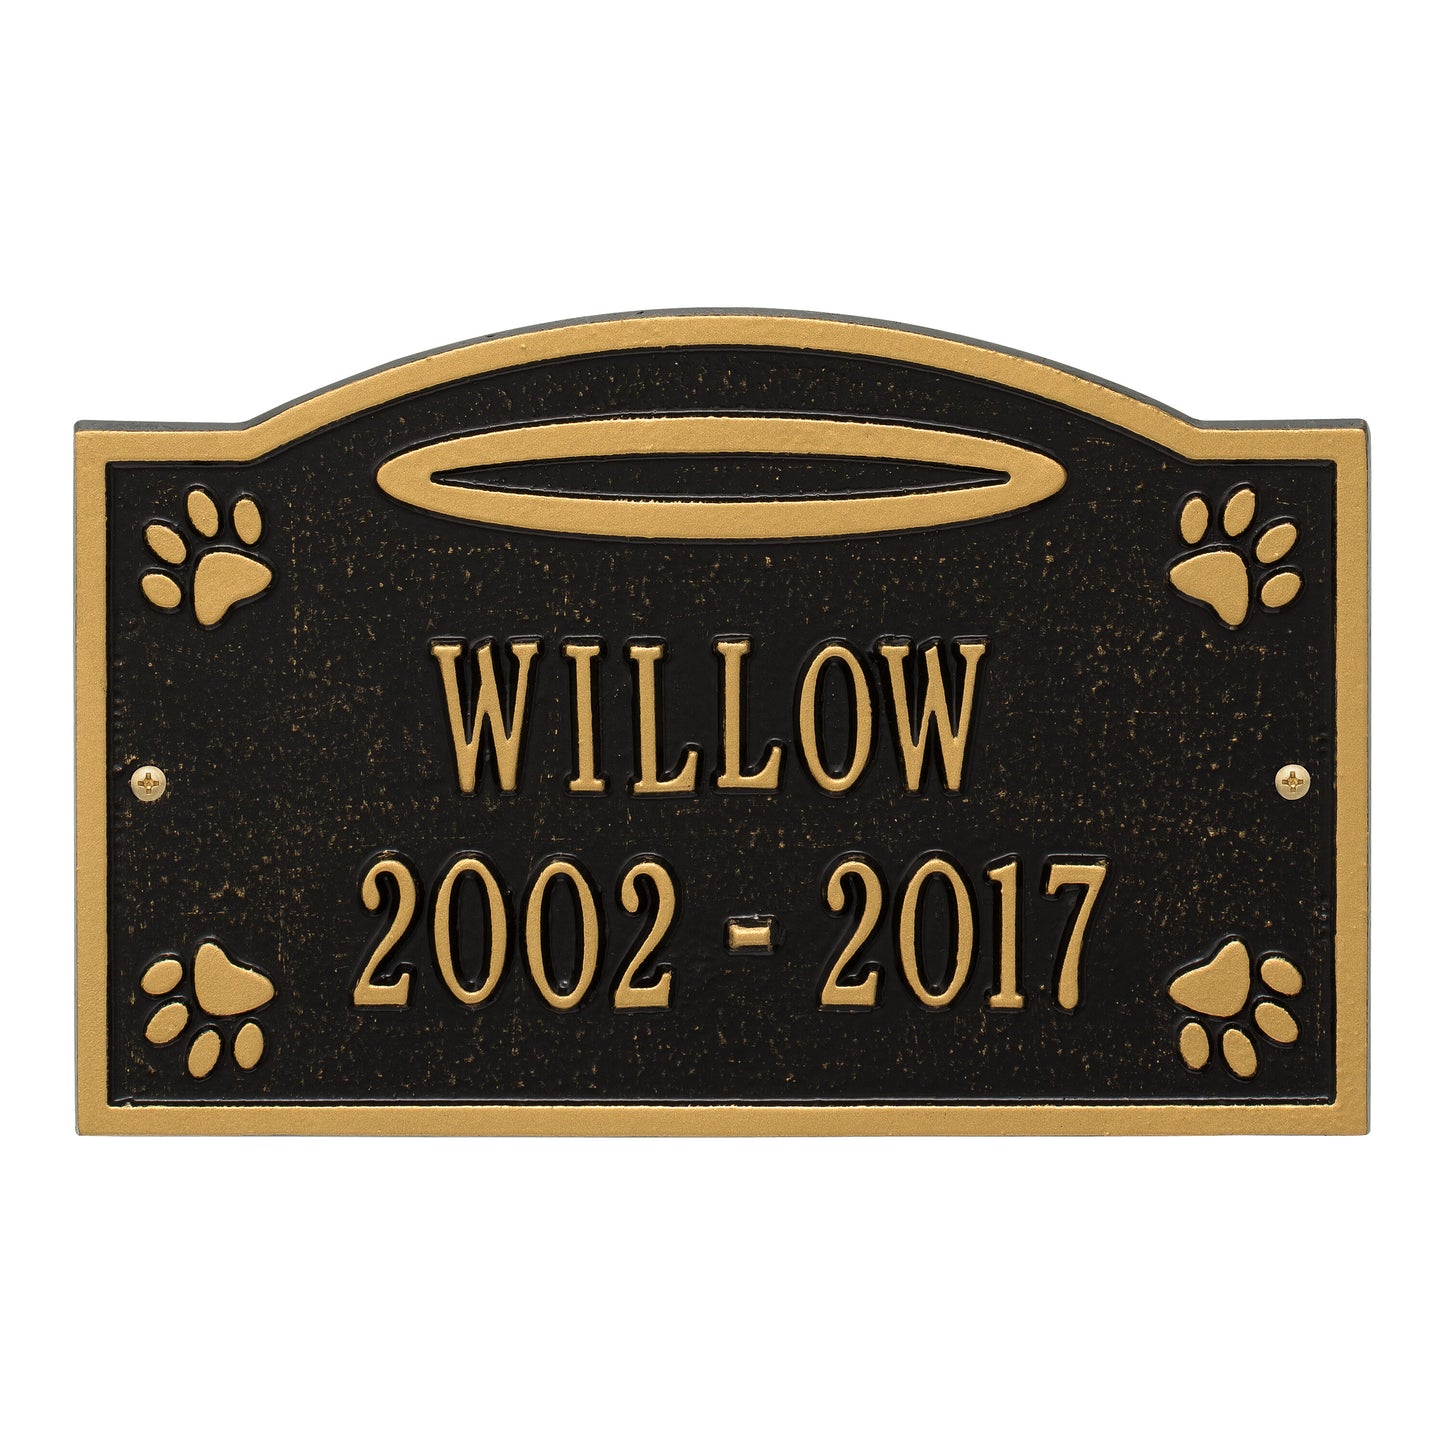 Whitehall Products Angel In Heaven Pet Memorial Personalized Wall Or Ground Plaque Two Lines Bronze/gold